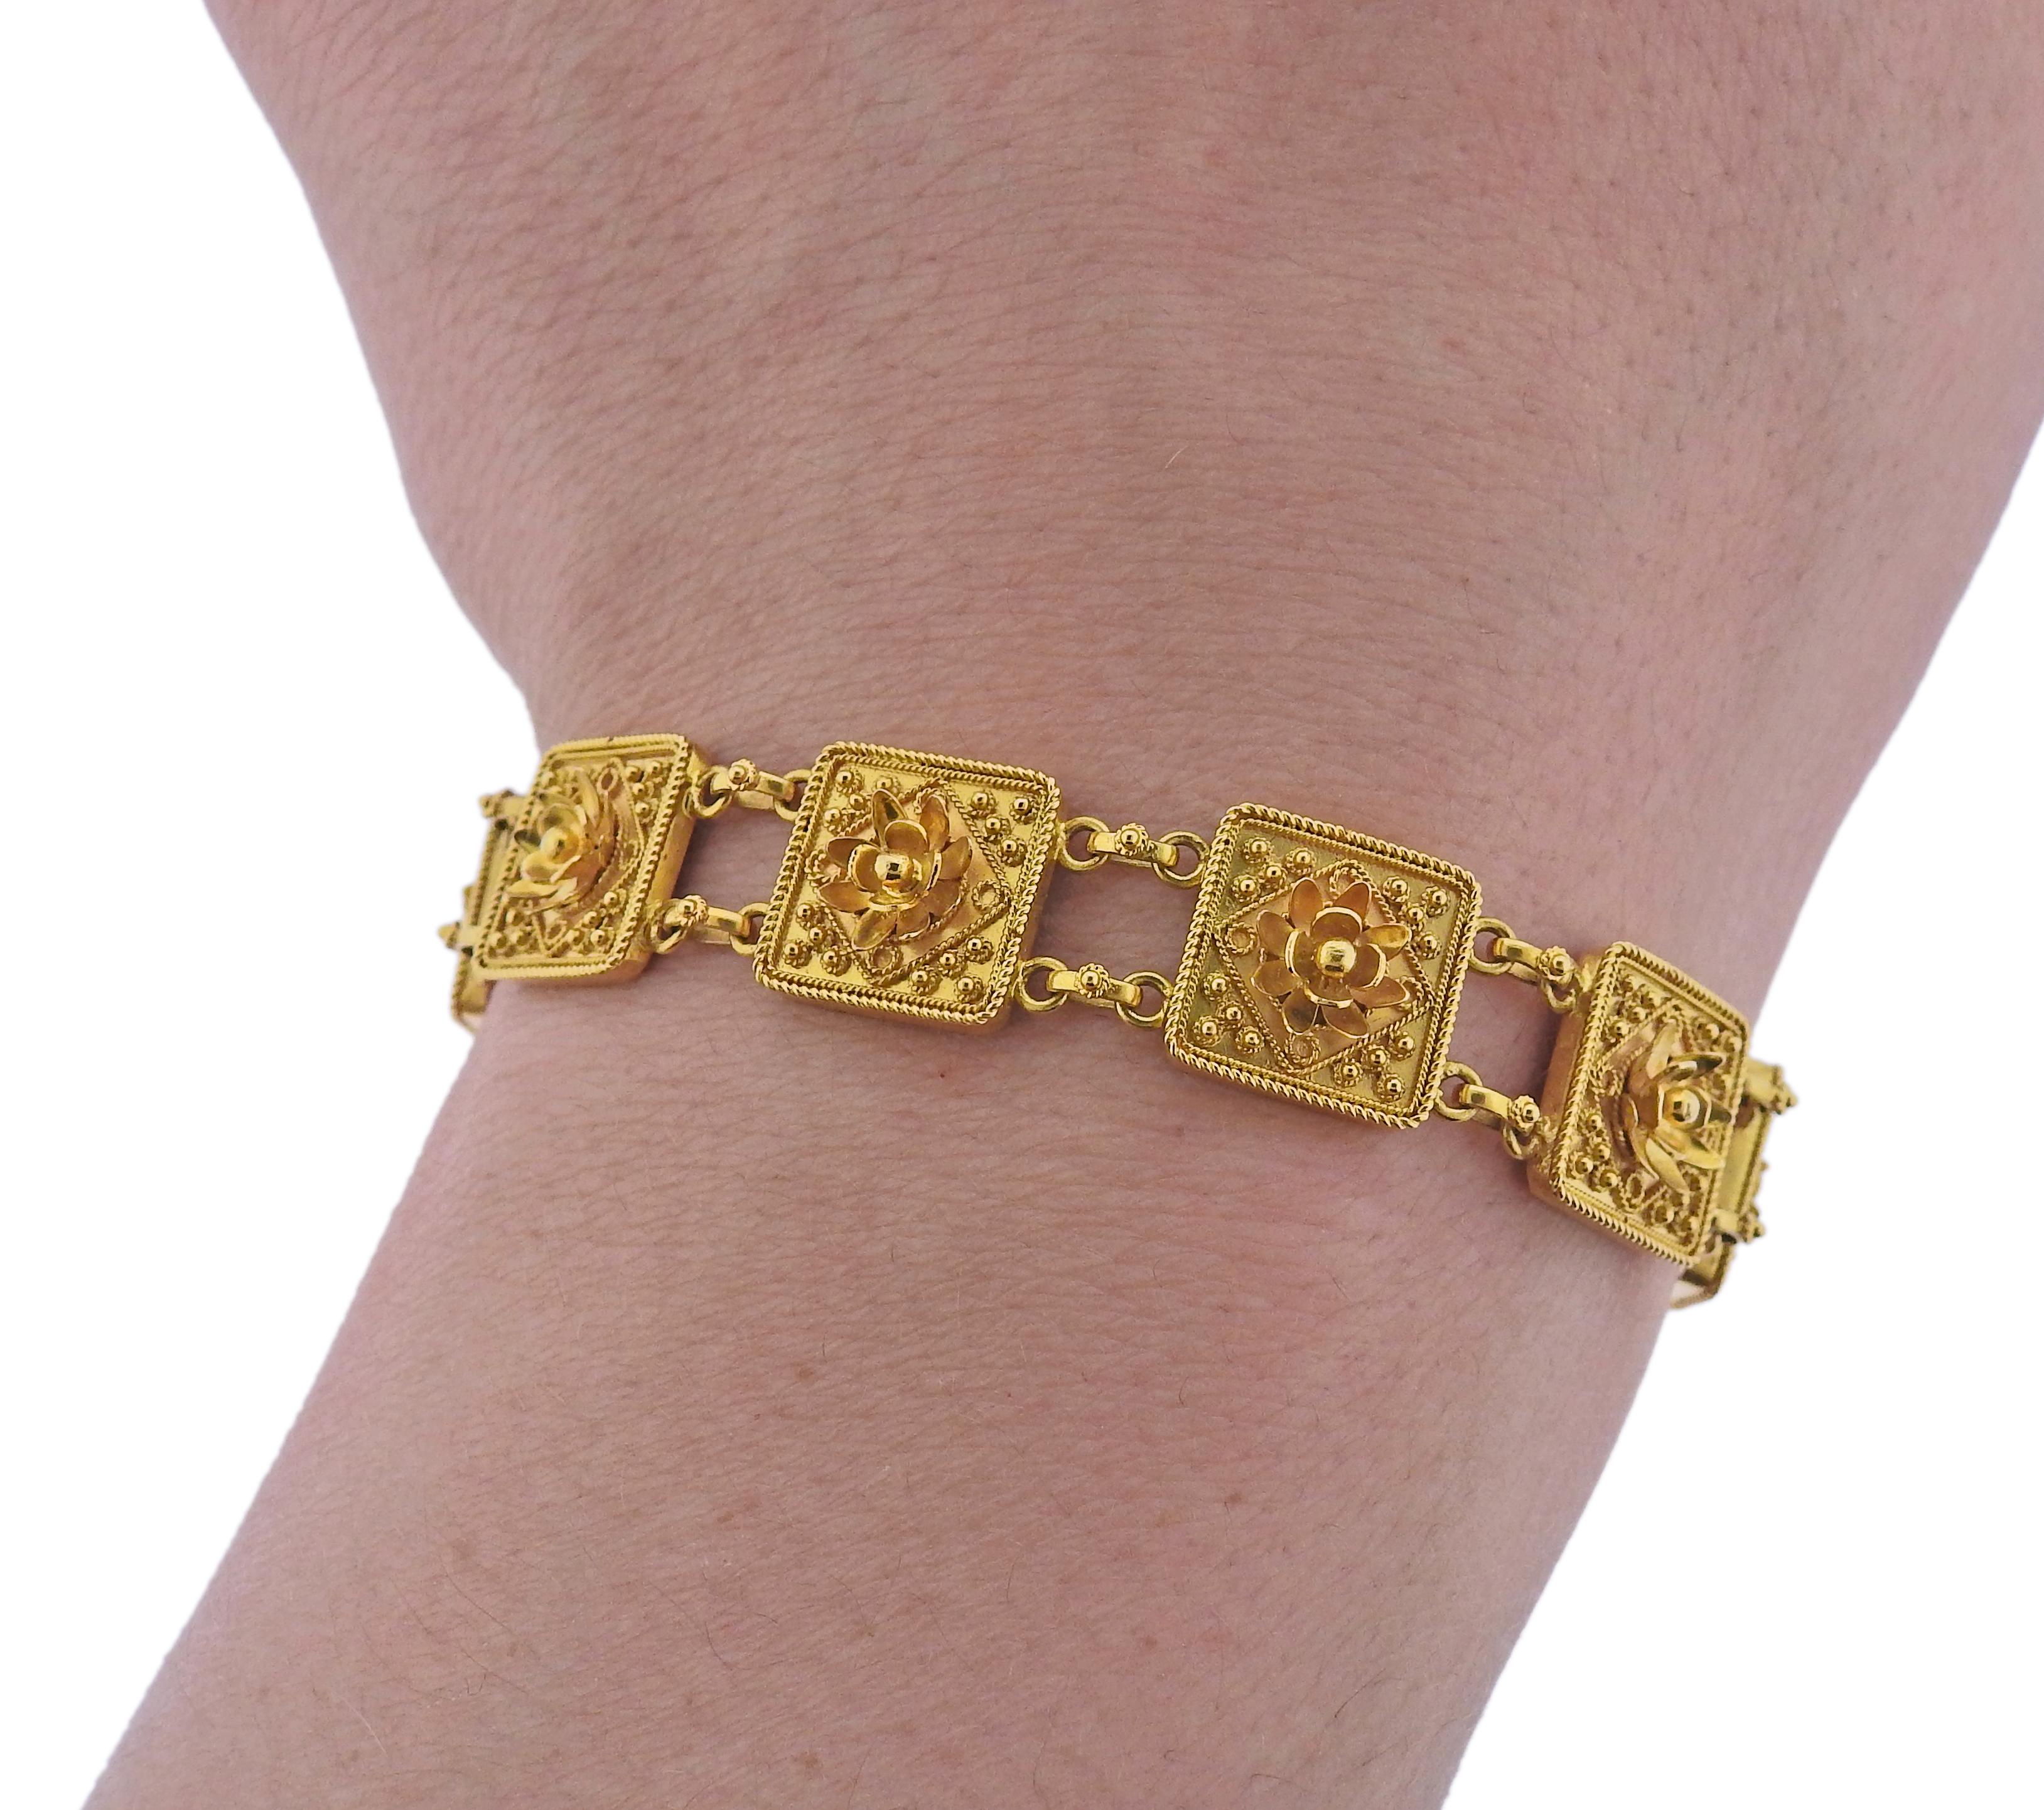 Castellani Gold Bracelet In Excellent Condition For Sale In New York, NY